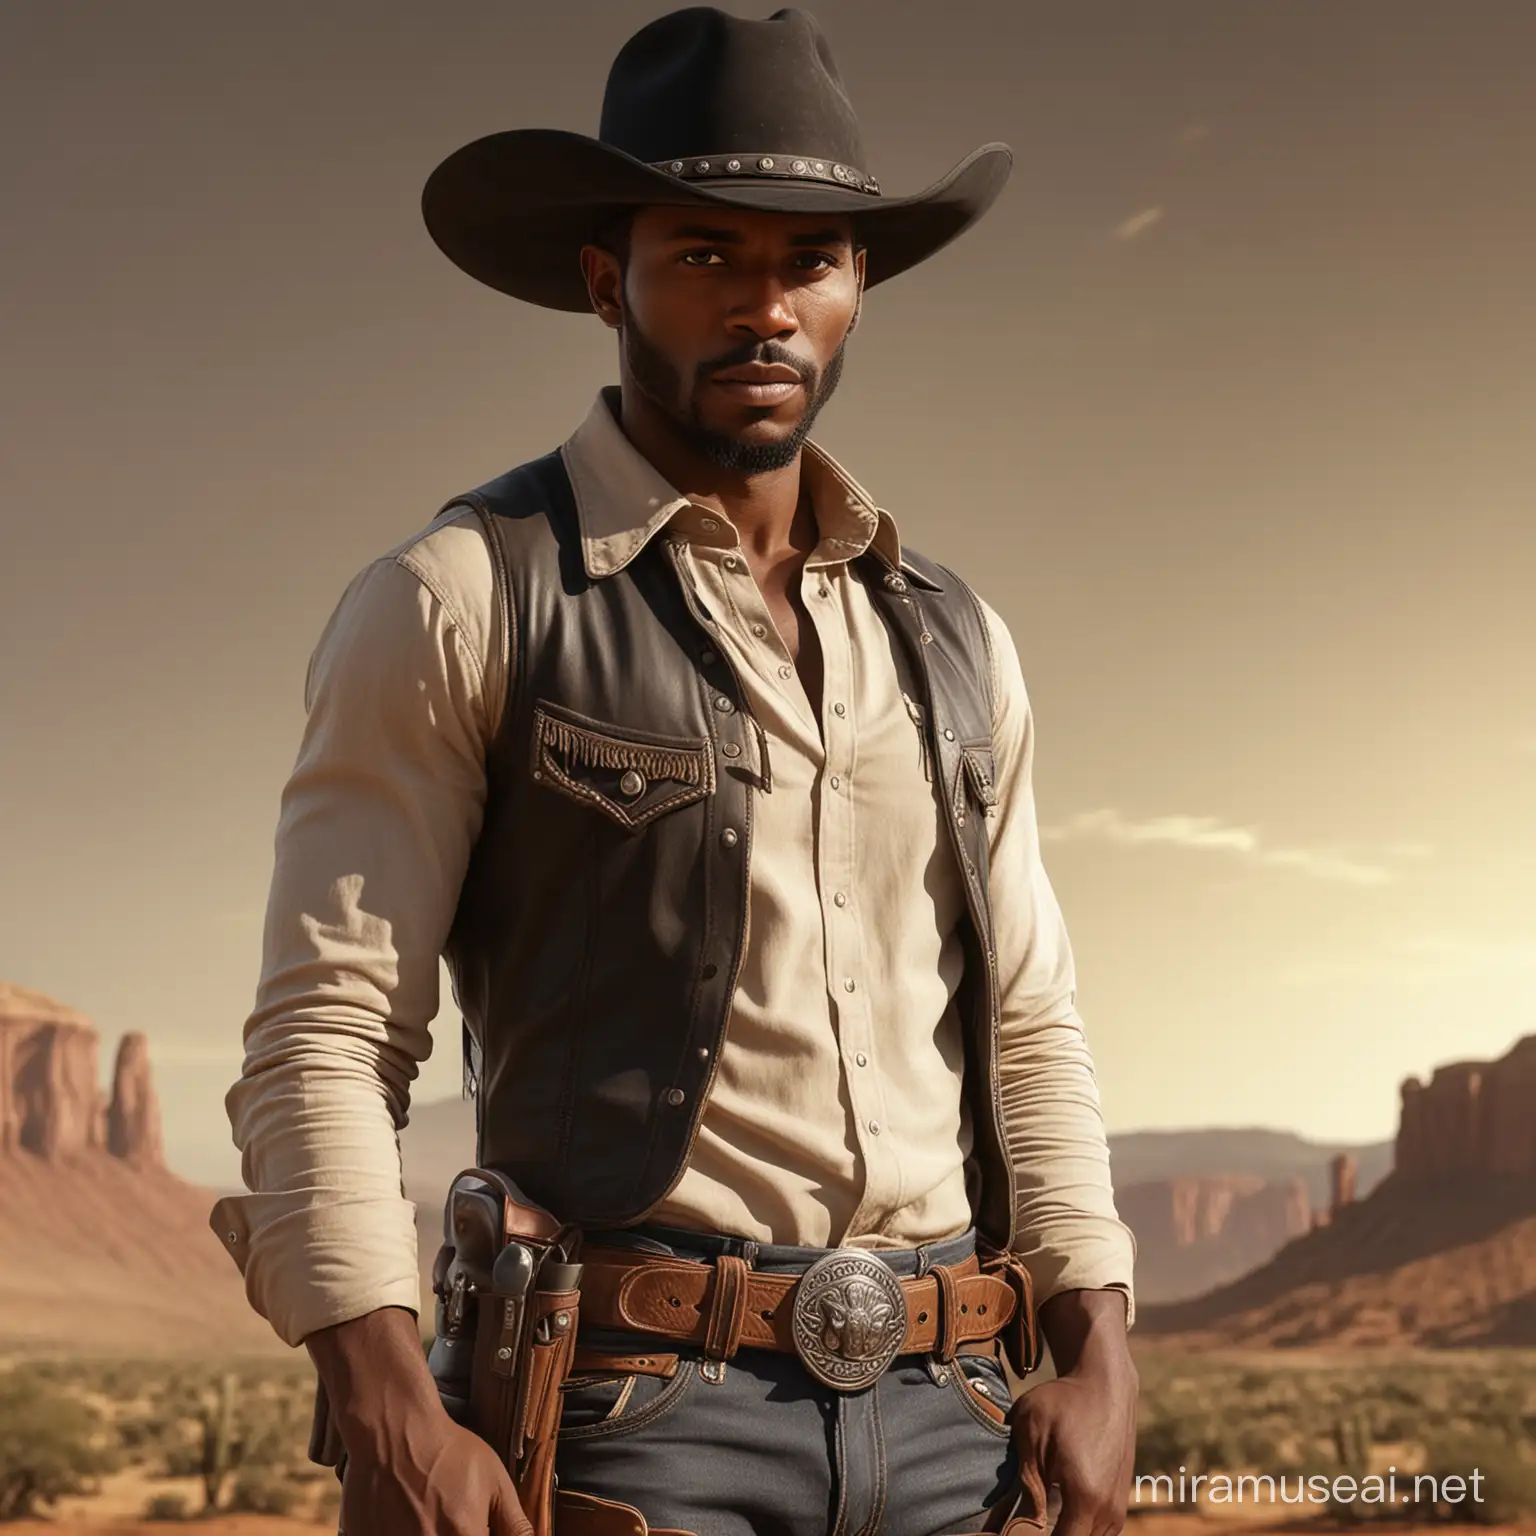 Detailed Portrait of a Black Cowboy in Wild West Setting